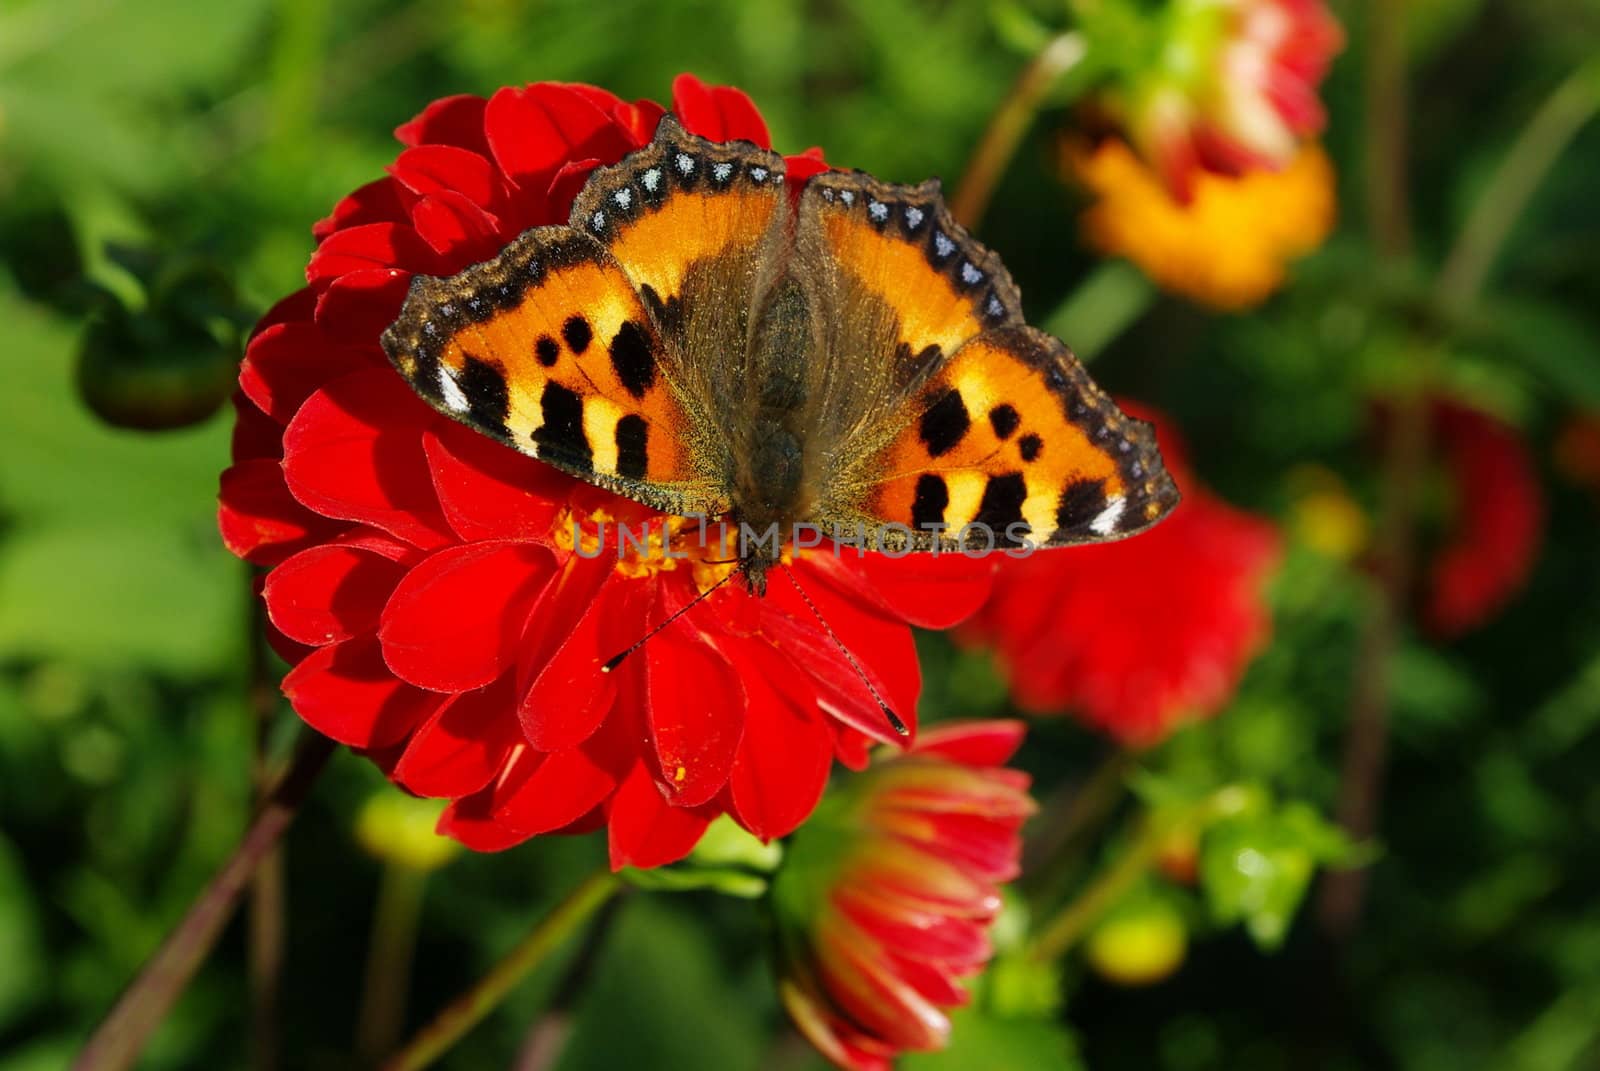 Butterfly, taking off from yellow flower in the garden